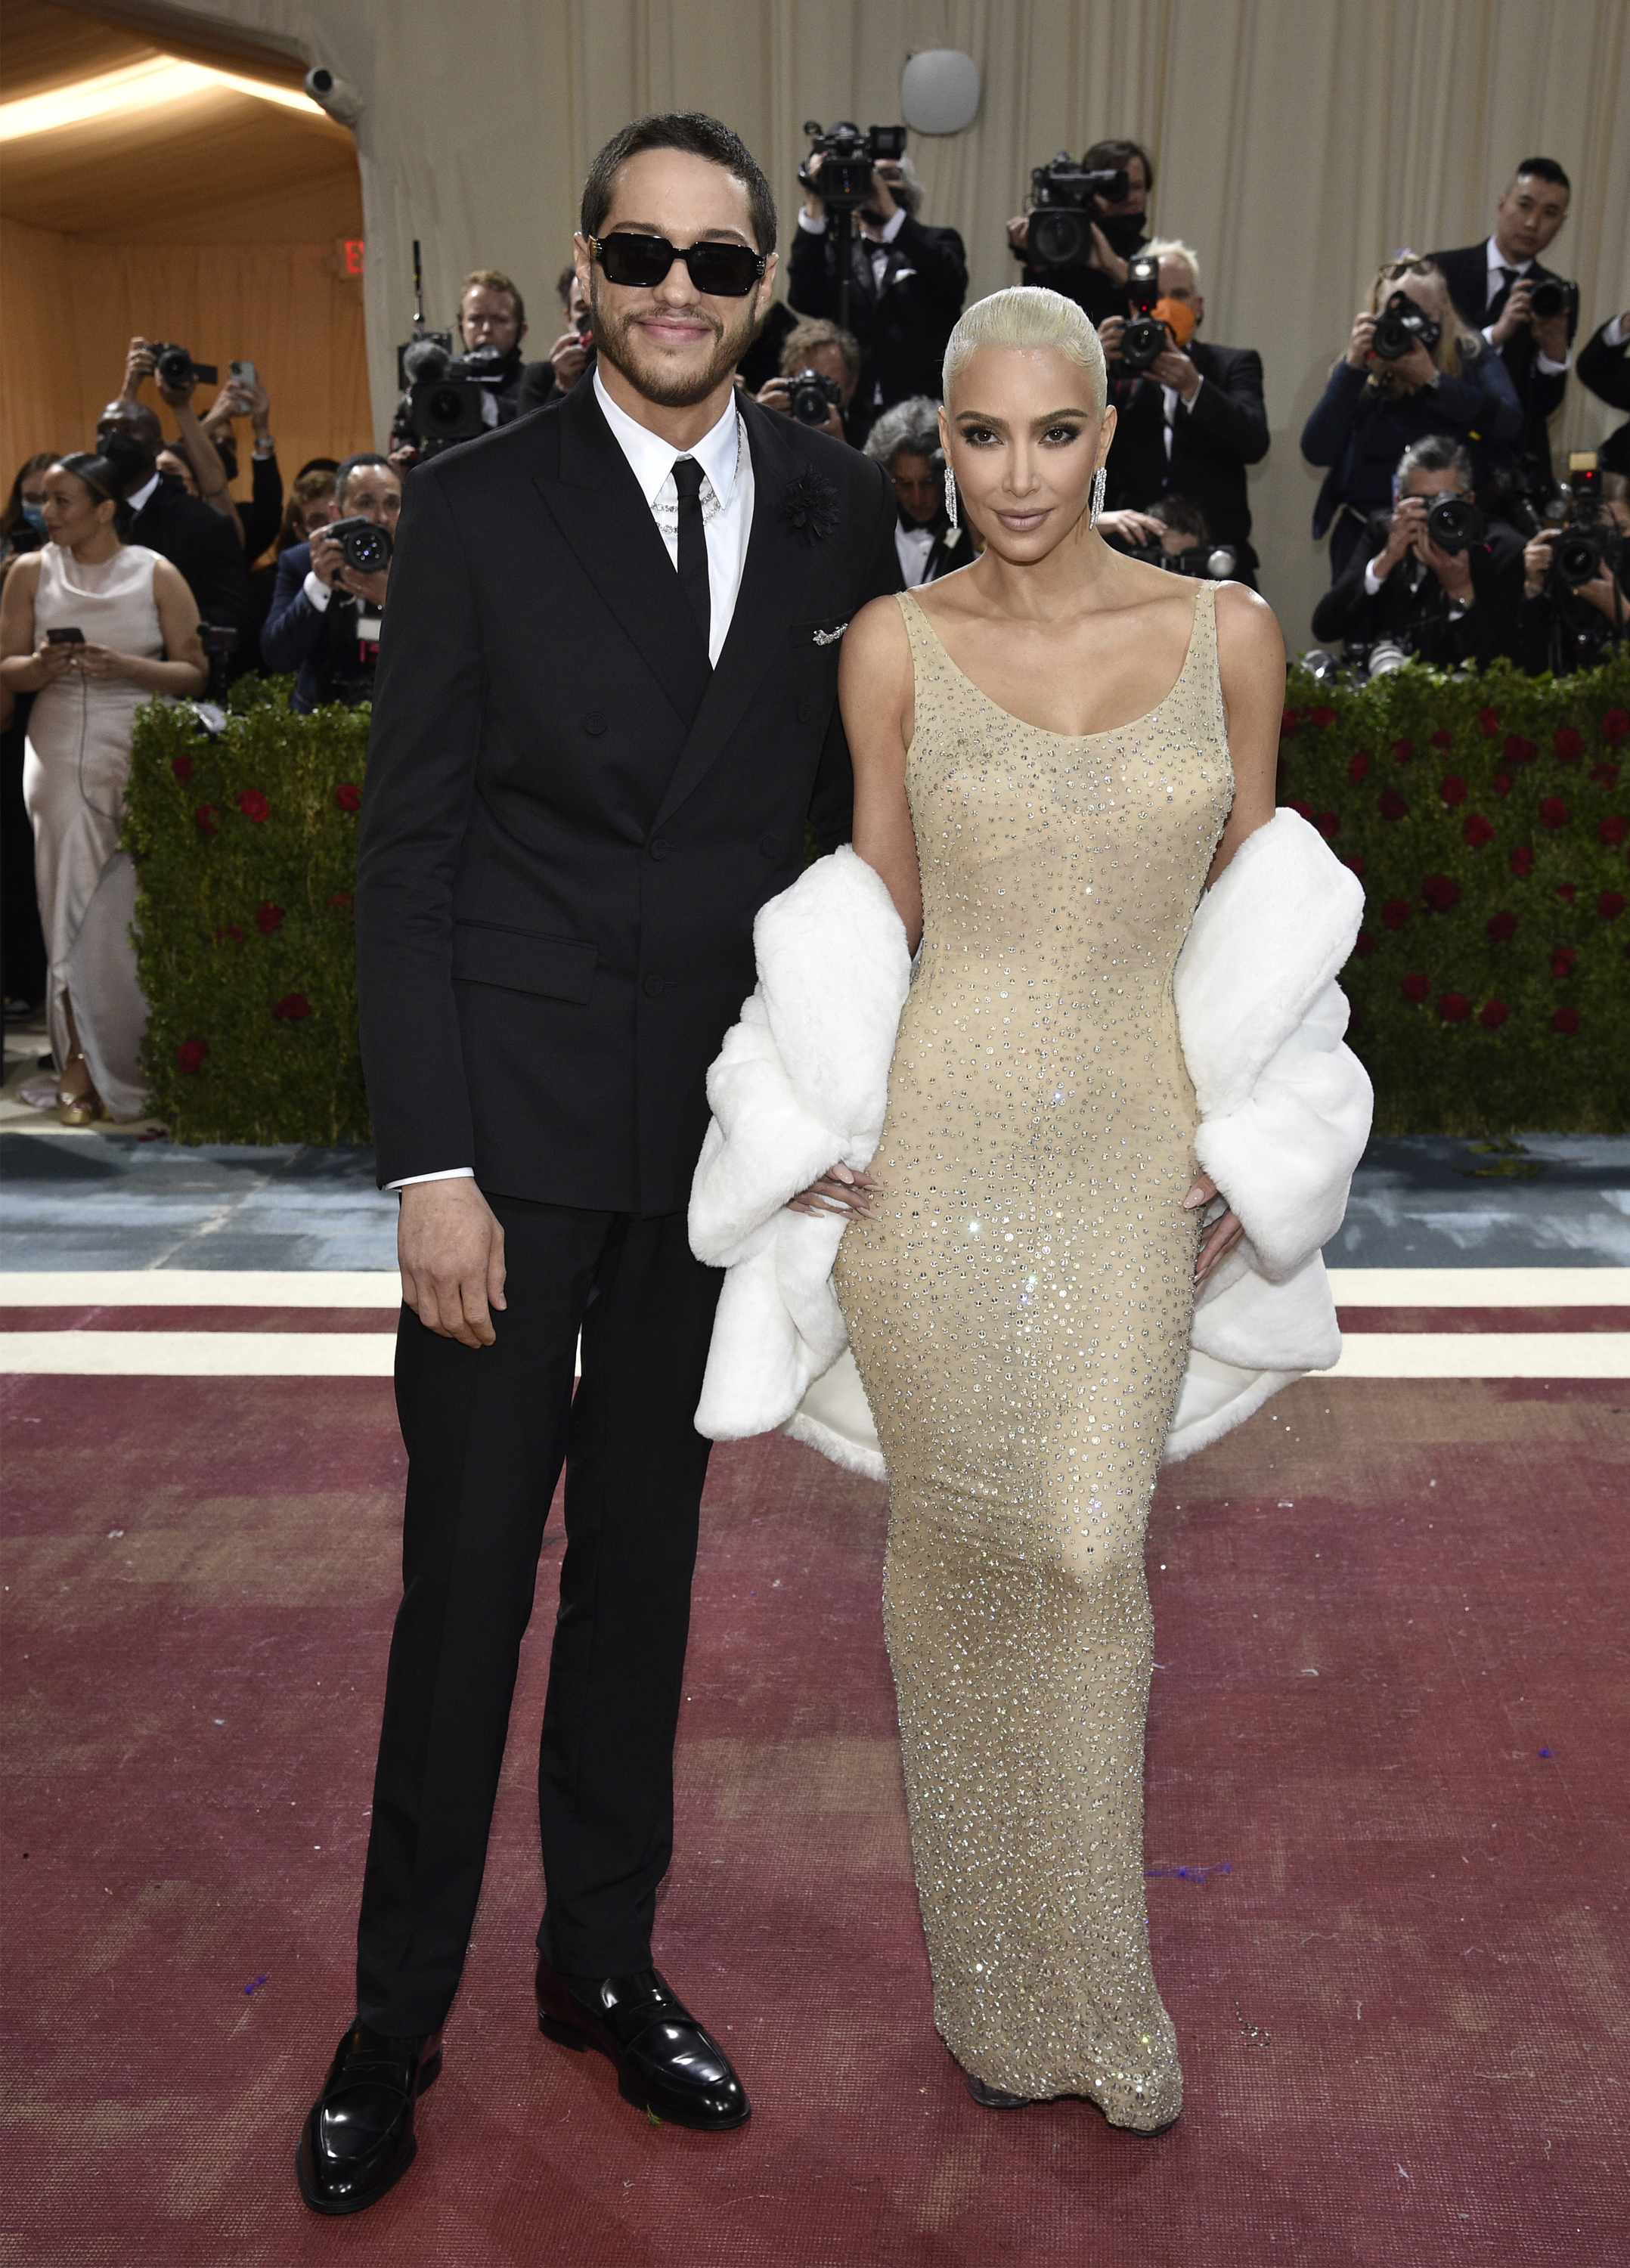 Kim Kardashian, right, and Pete Davidson attend The Metropolitan Museum of Art's Costume Institute benefit gala celebrating the opening of the "In America: An Anthology of Fashion" exhibition on Monday, May 2, 2022, in New York. (Photo by Evan Agostini/Invision/AP)